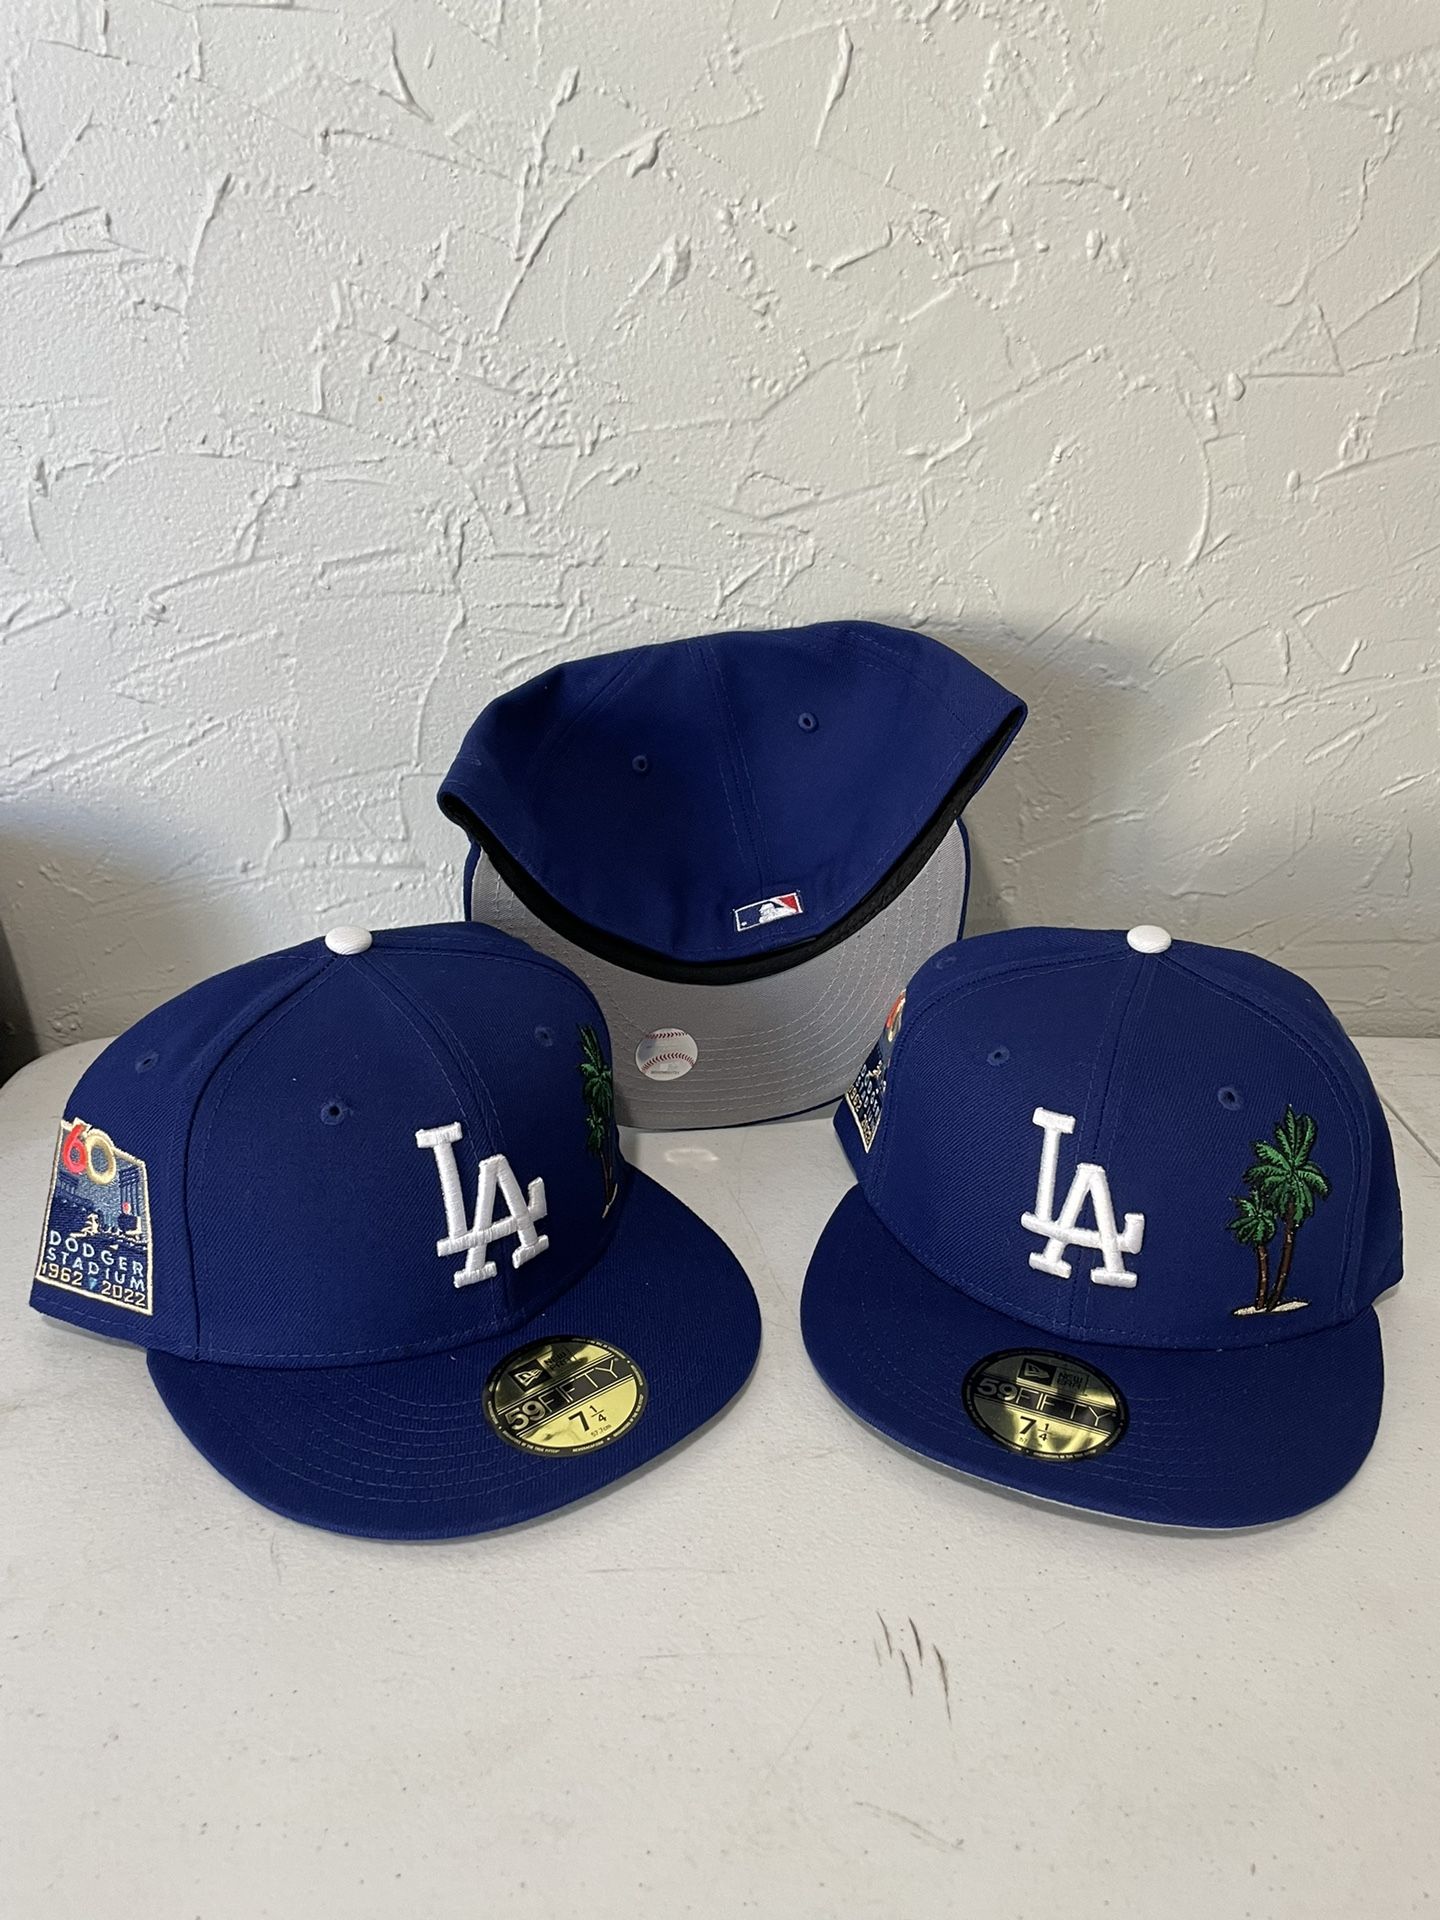 MLB New Era 59fifty Fitted Hats 7 3/4 And Size 8 for Sale in City Of  Industry, CA - OfferUp